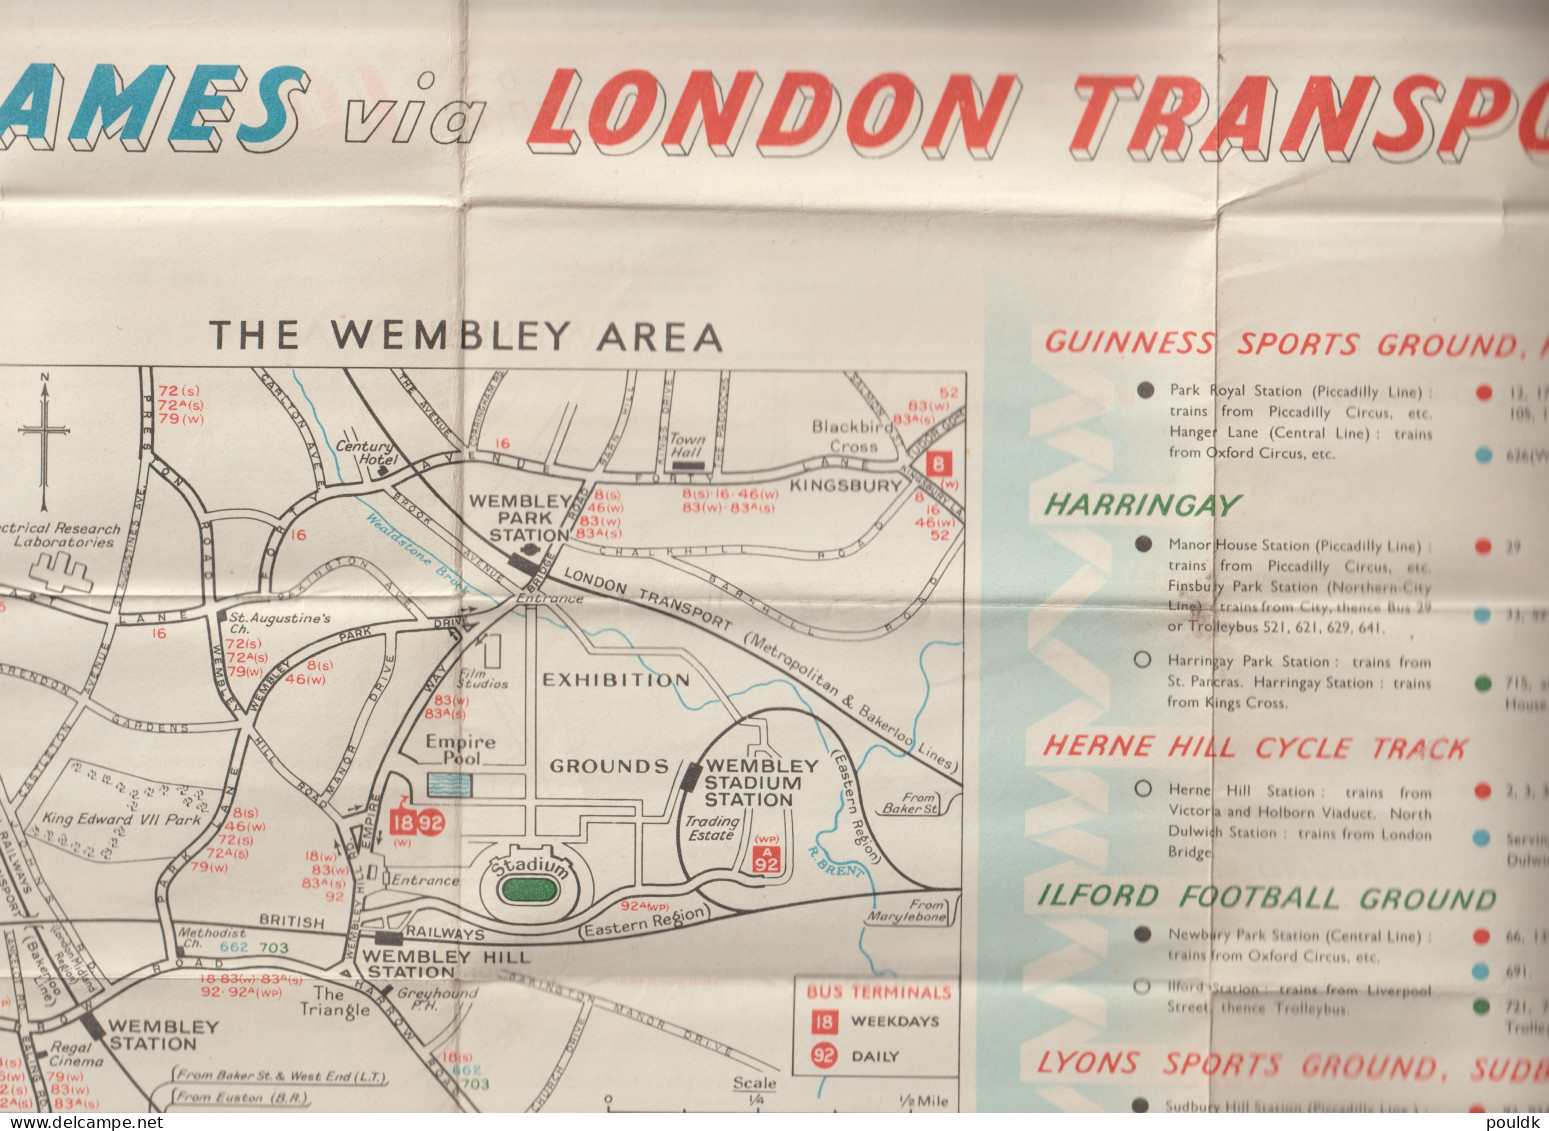 Olympic Games London 1948 - How To Get There By London Transport. Folded Map W/transport Informations. Postal  - Ete 1948: Londres